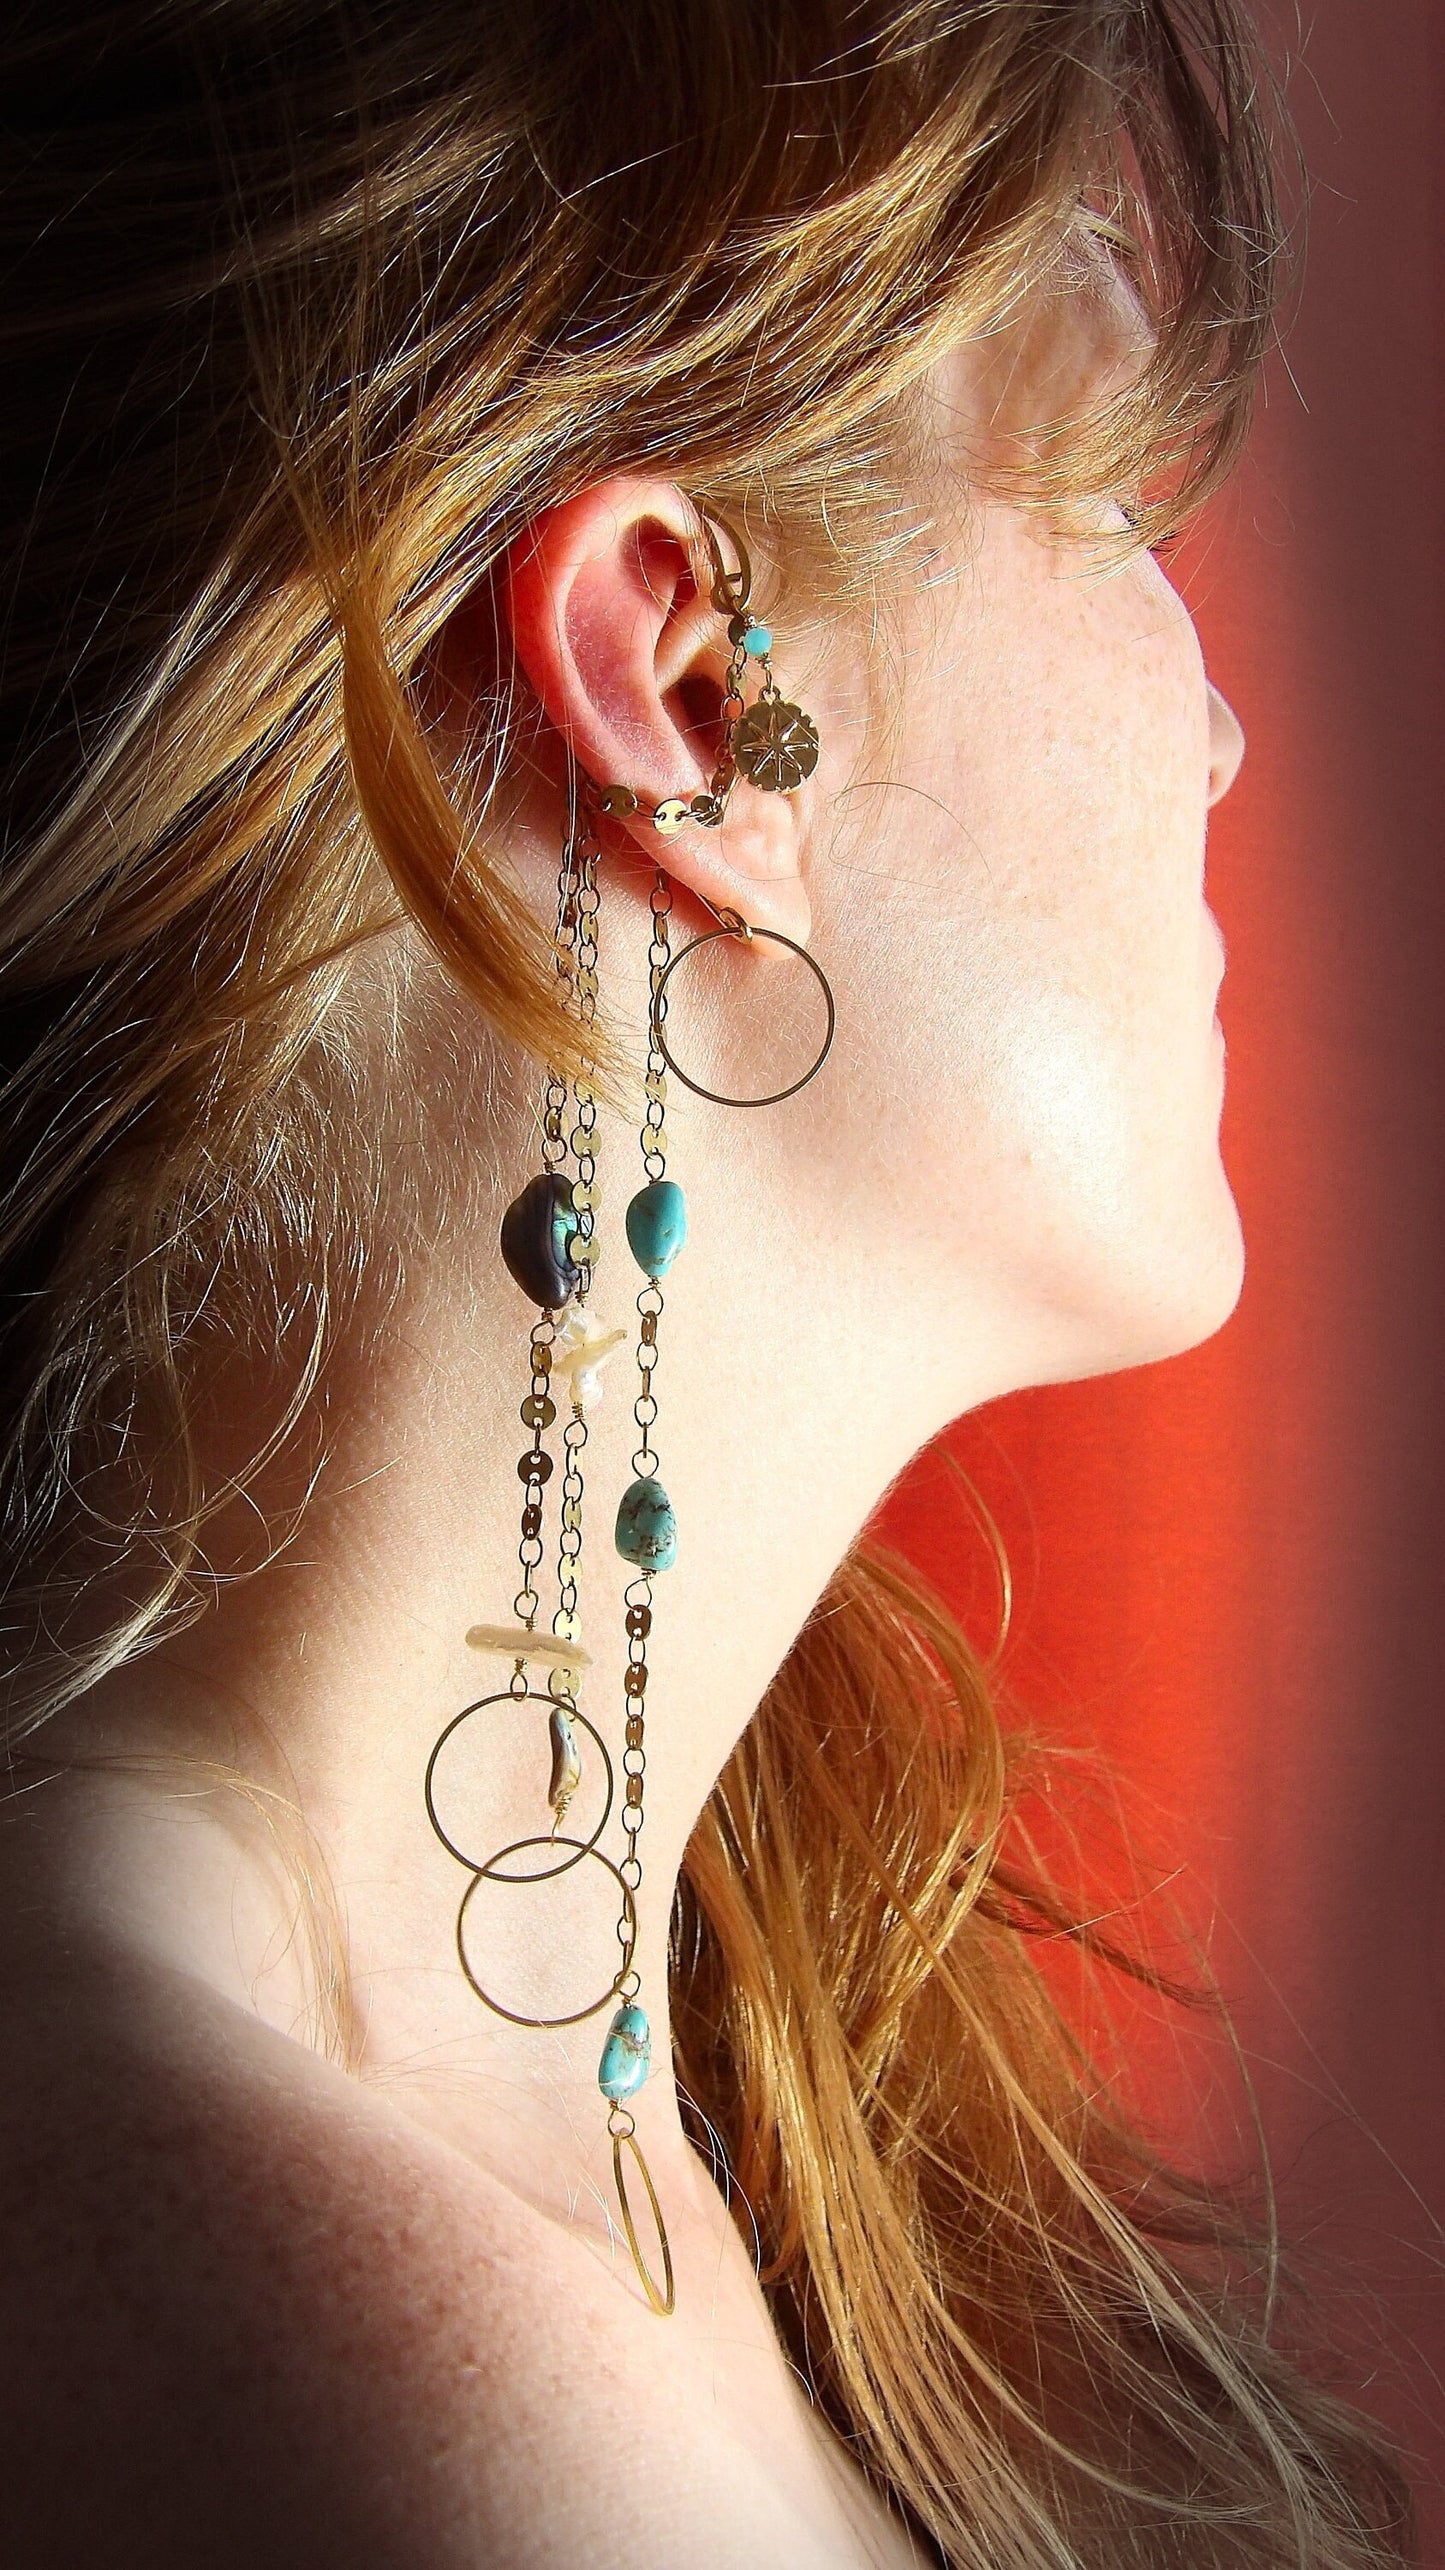 Ear Wrap With Turquoise, Pearl & Abalone | Hippie Jewelry | Sirencore Ear Cuff With Chains | Whimsigoth Bohemian Jewelry | Gift For Her